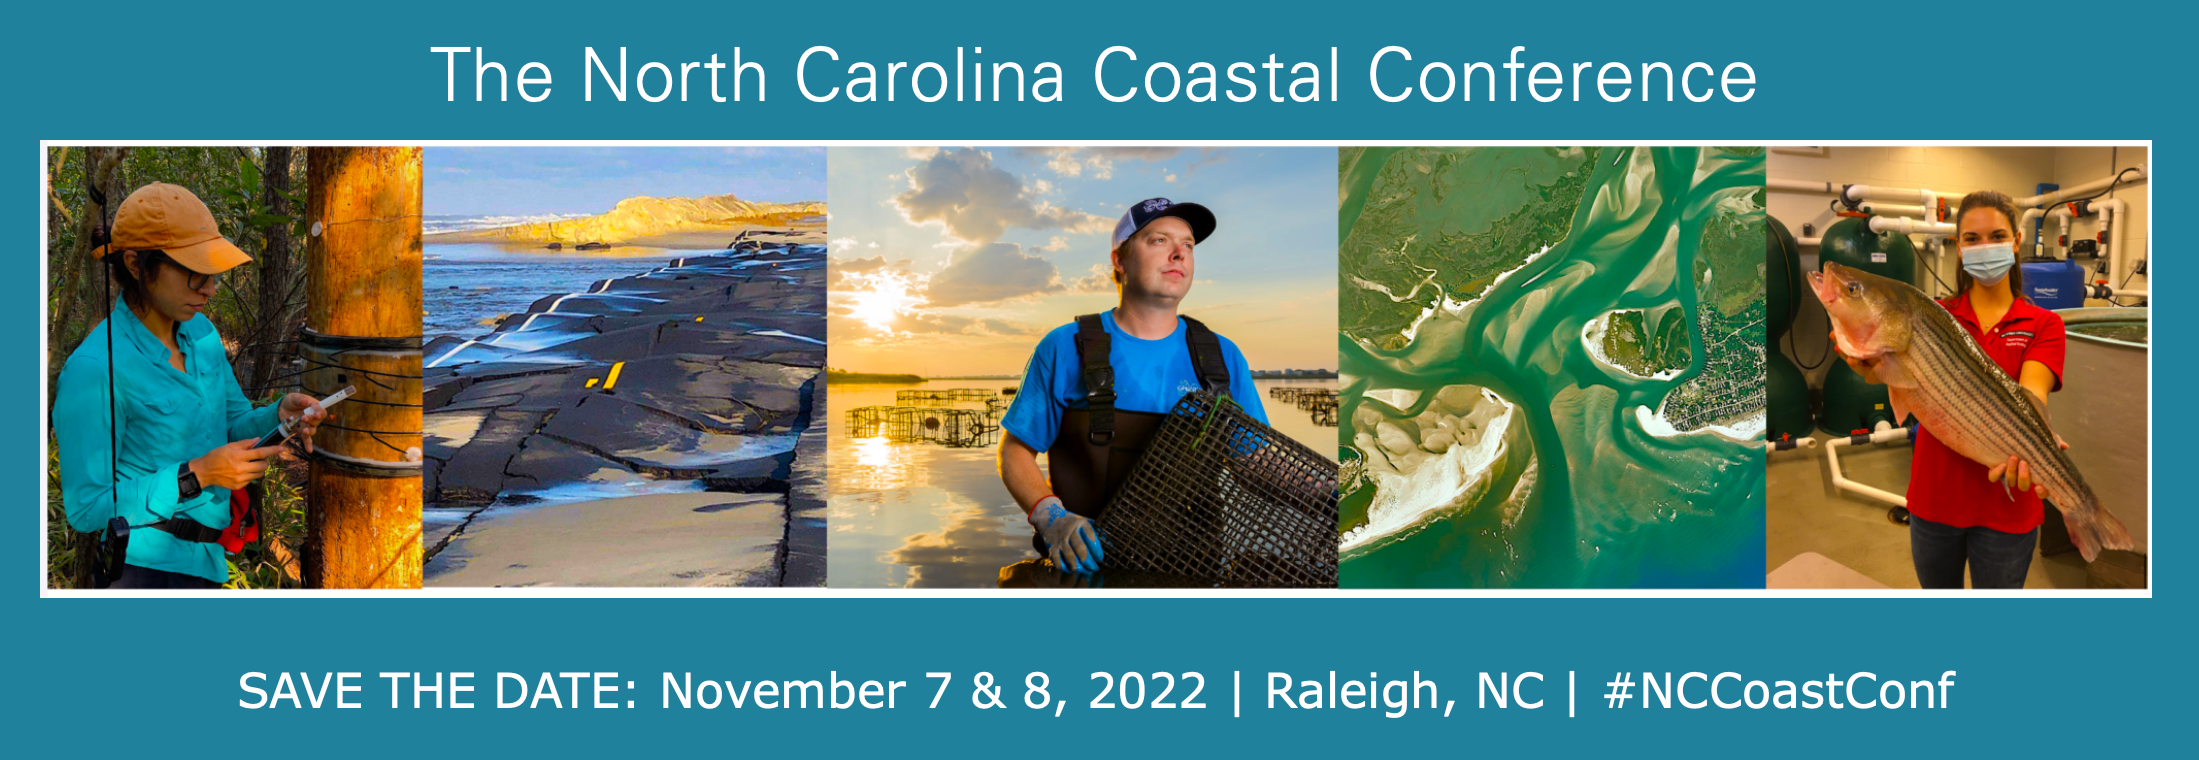 ad for the NC Coastal Conference.